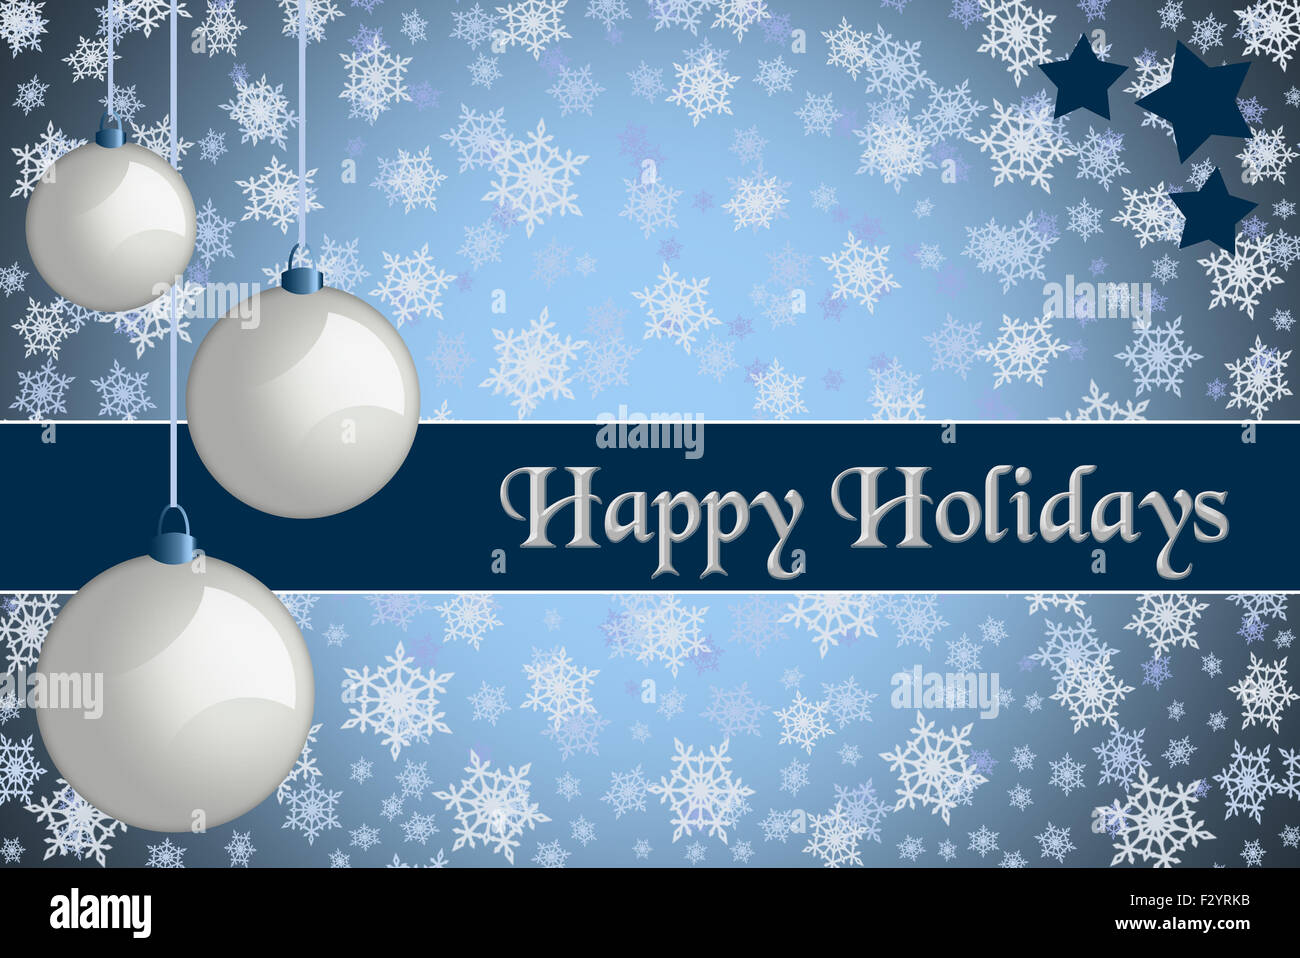 Christmas greeting card. "Happy Holidays" Blue colored Christmas card with retro white baubles and snowflake background. Stock Photo